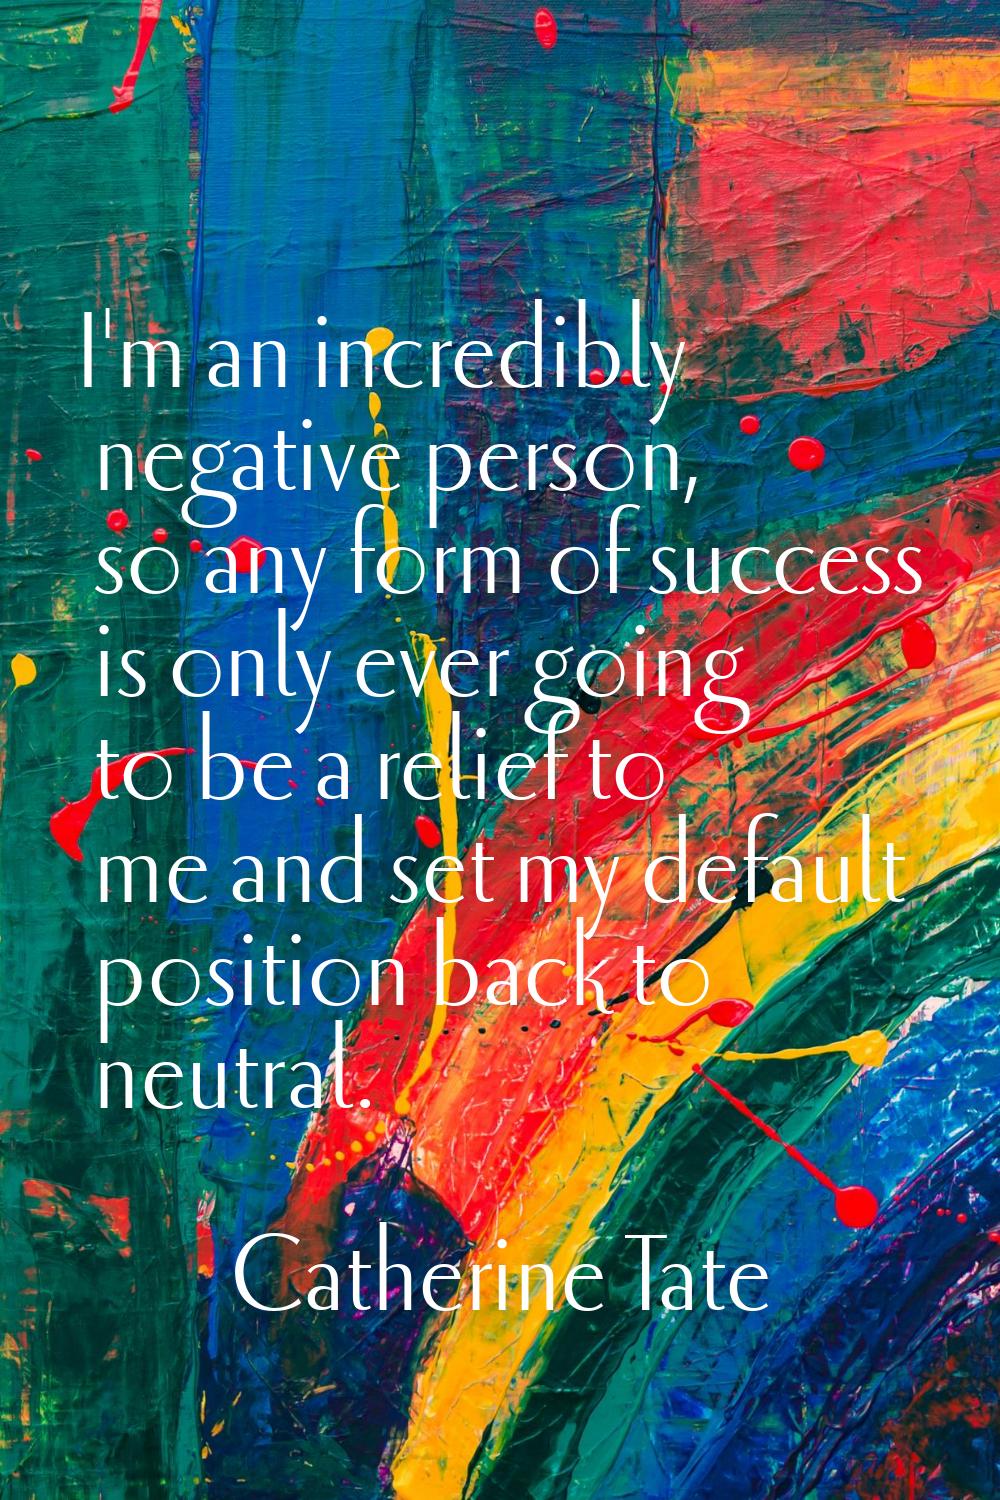 I'm an incredibly negative person, so any form of success is only ever going to be a relief to me a